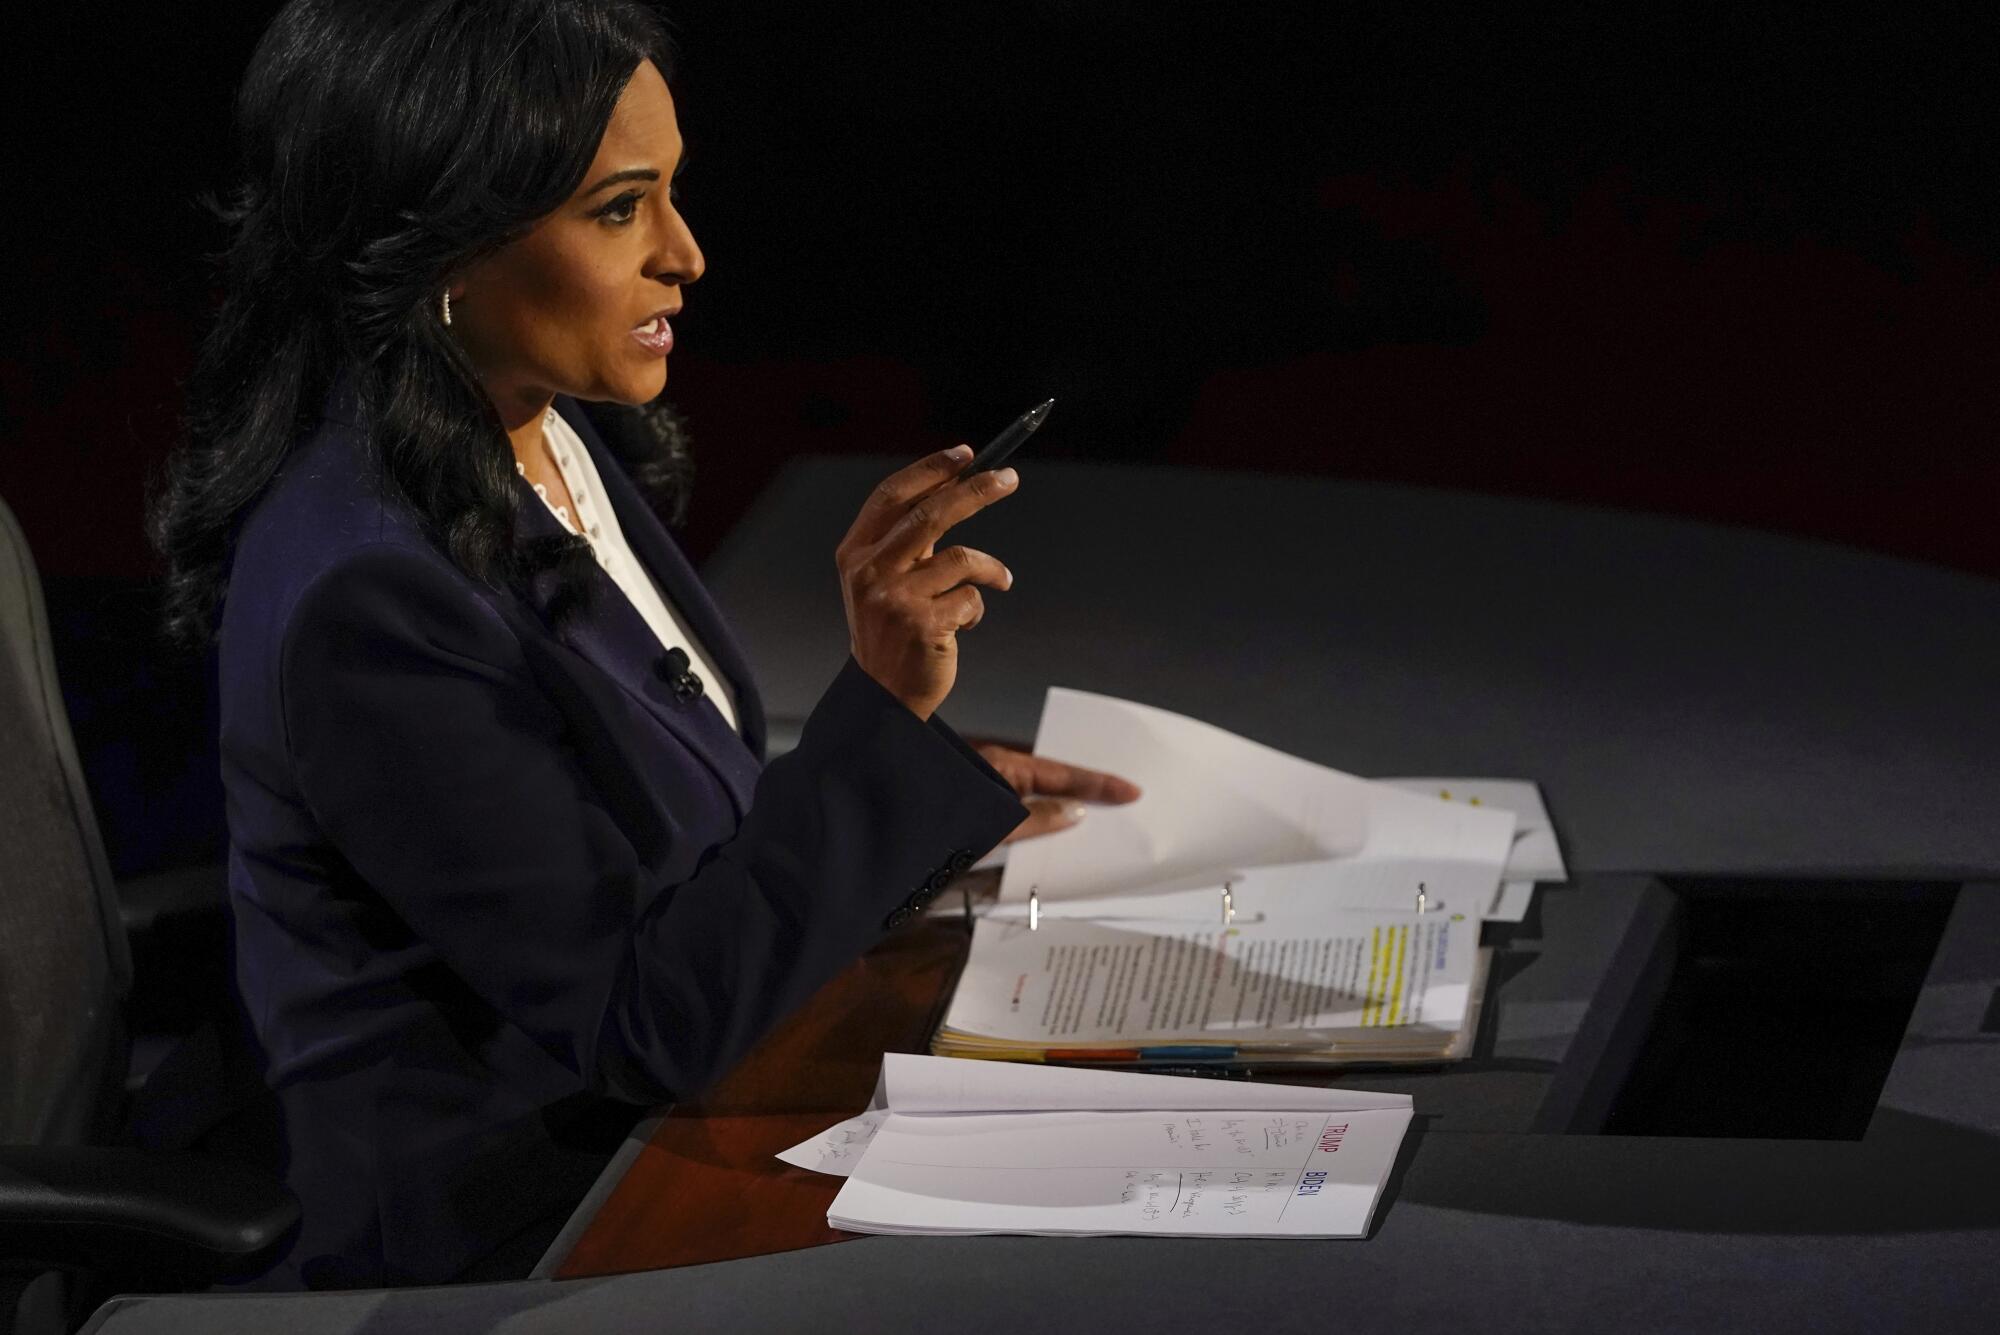 Moderator Kristen Welker gestures with a pen in her hand sitting in front of notes on her desk